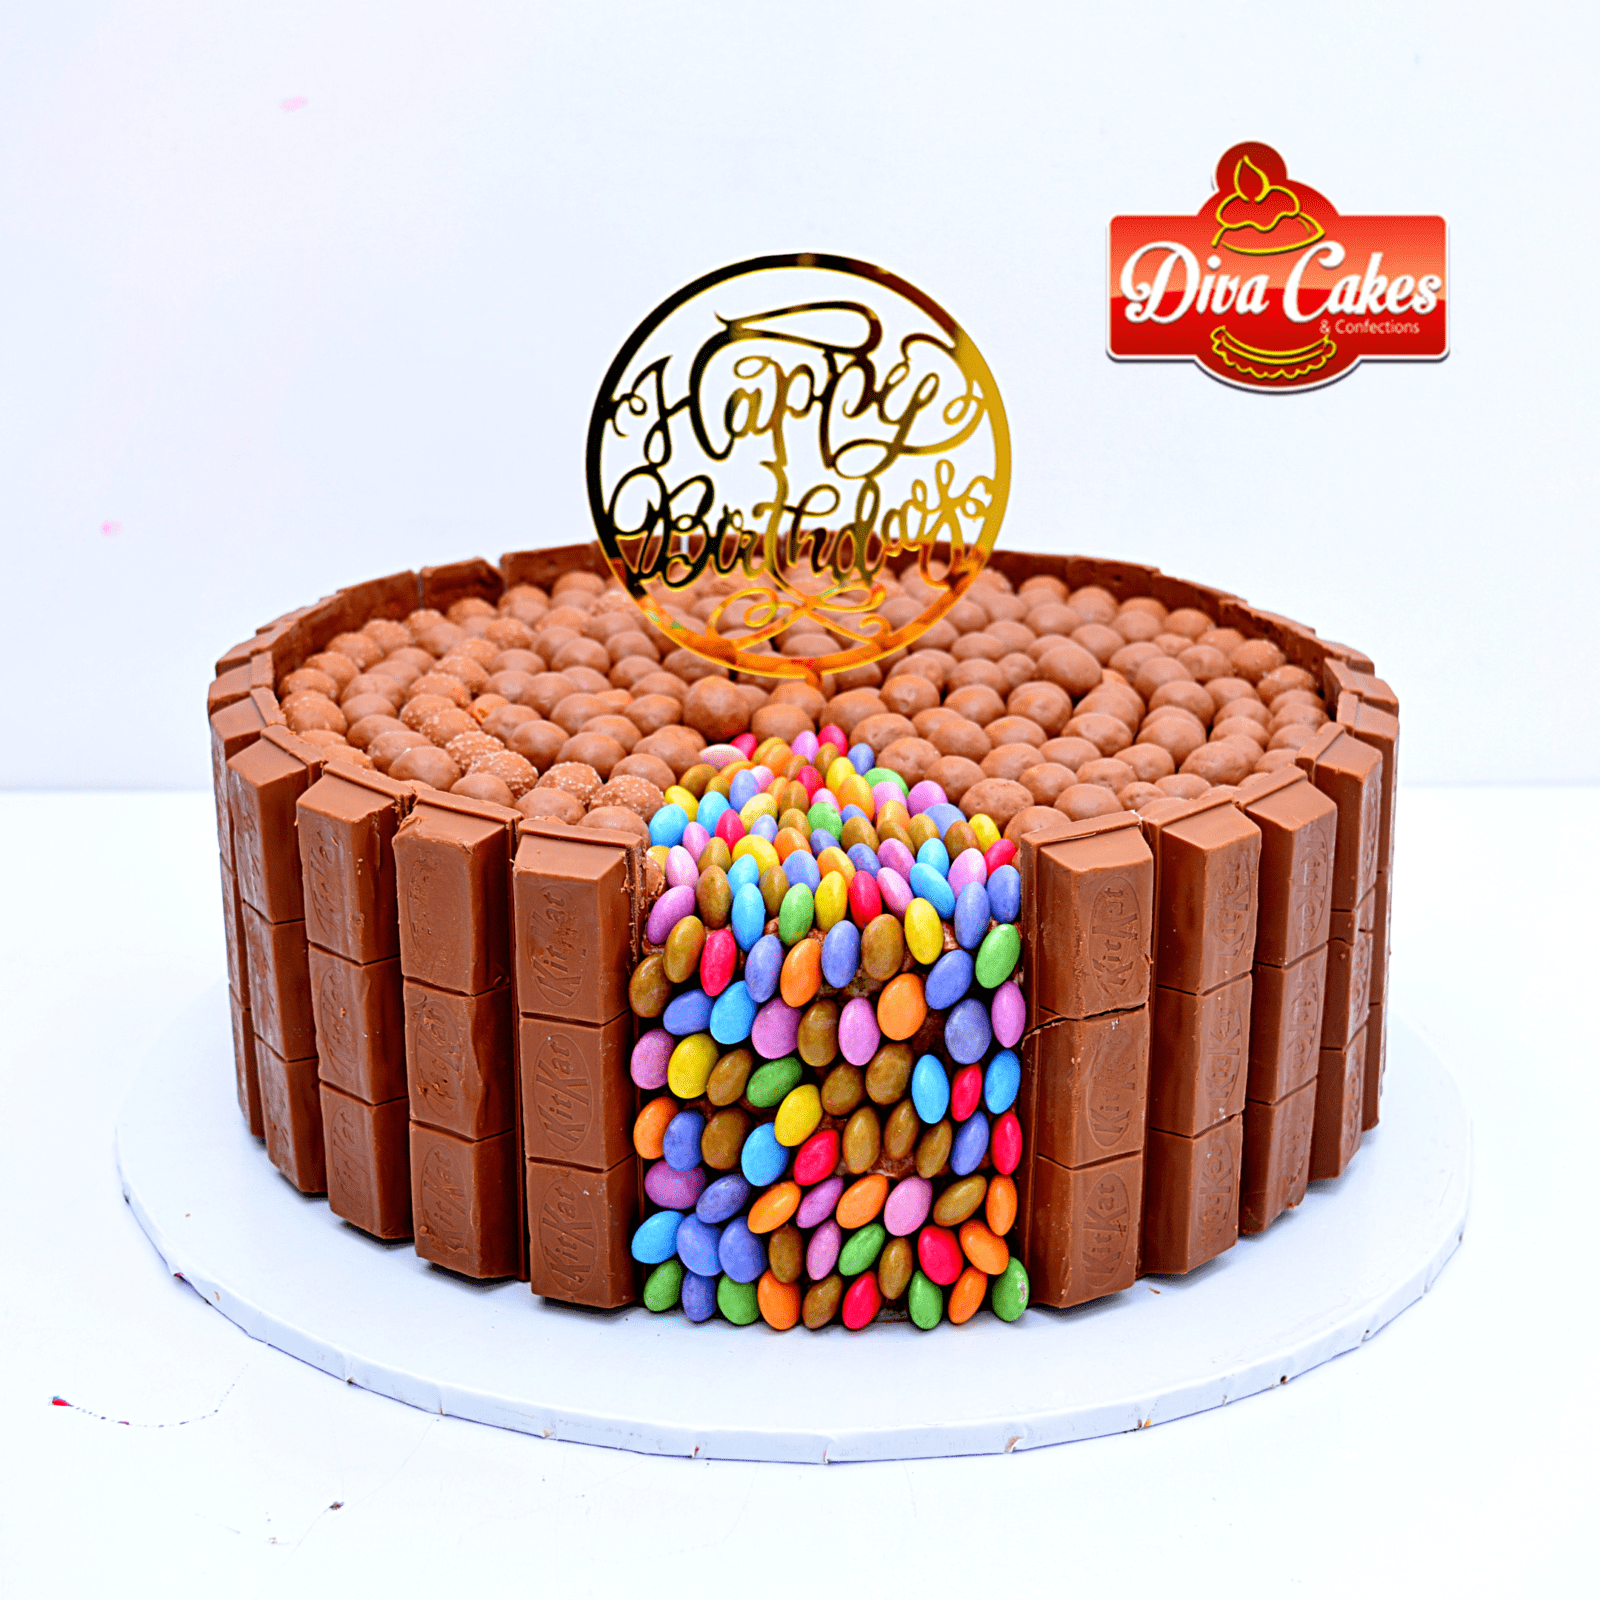 Chocolate Bars Cake | Cake Delivery in Lagos